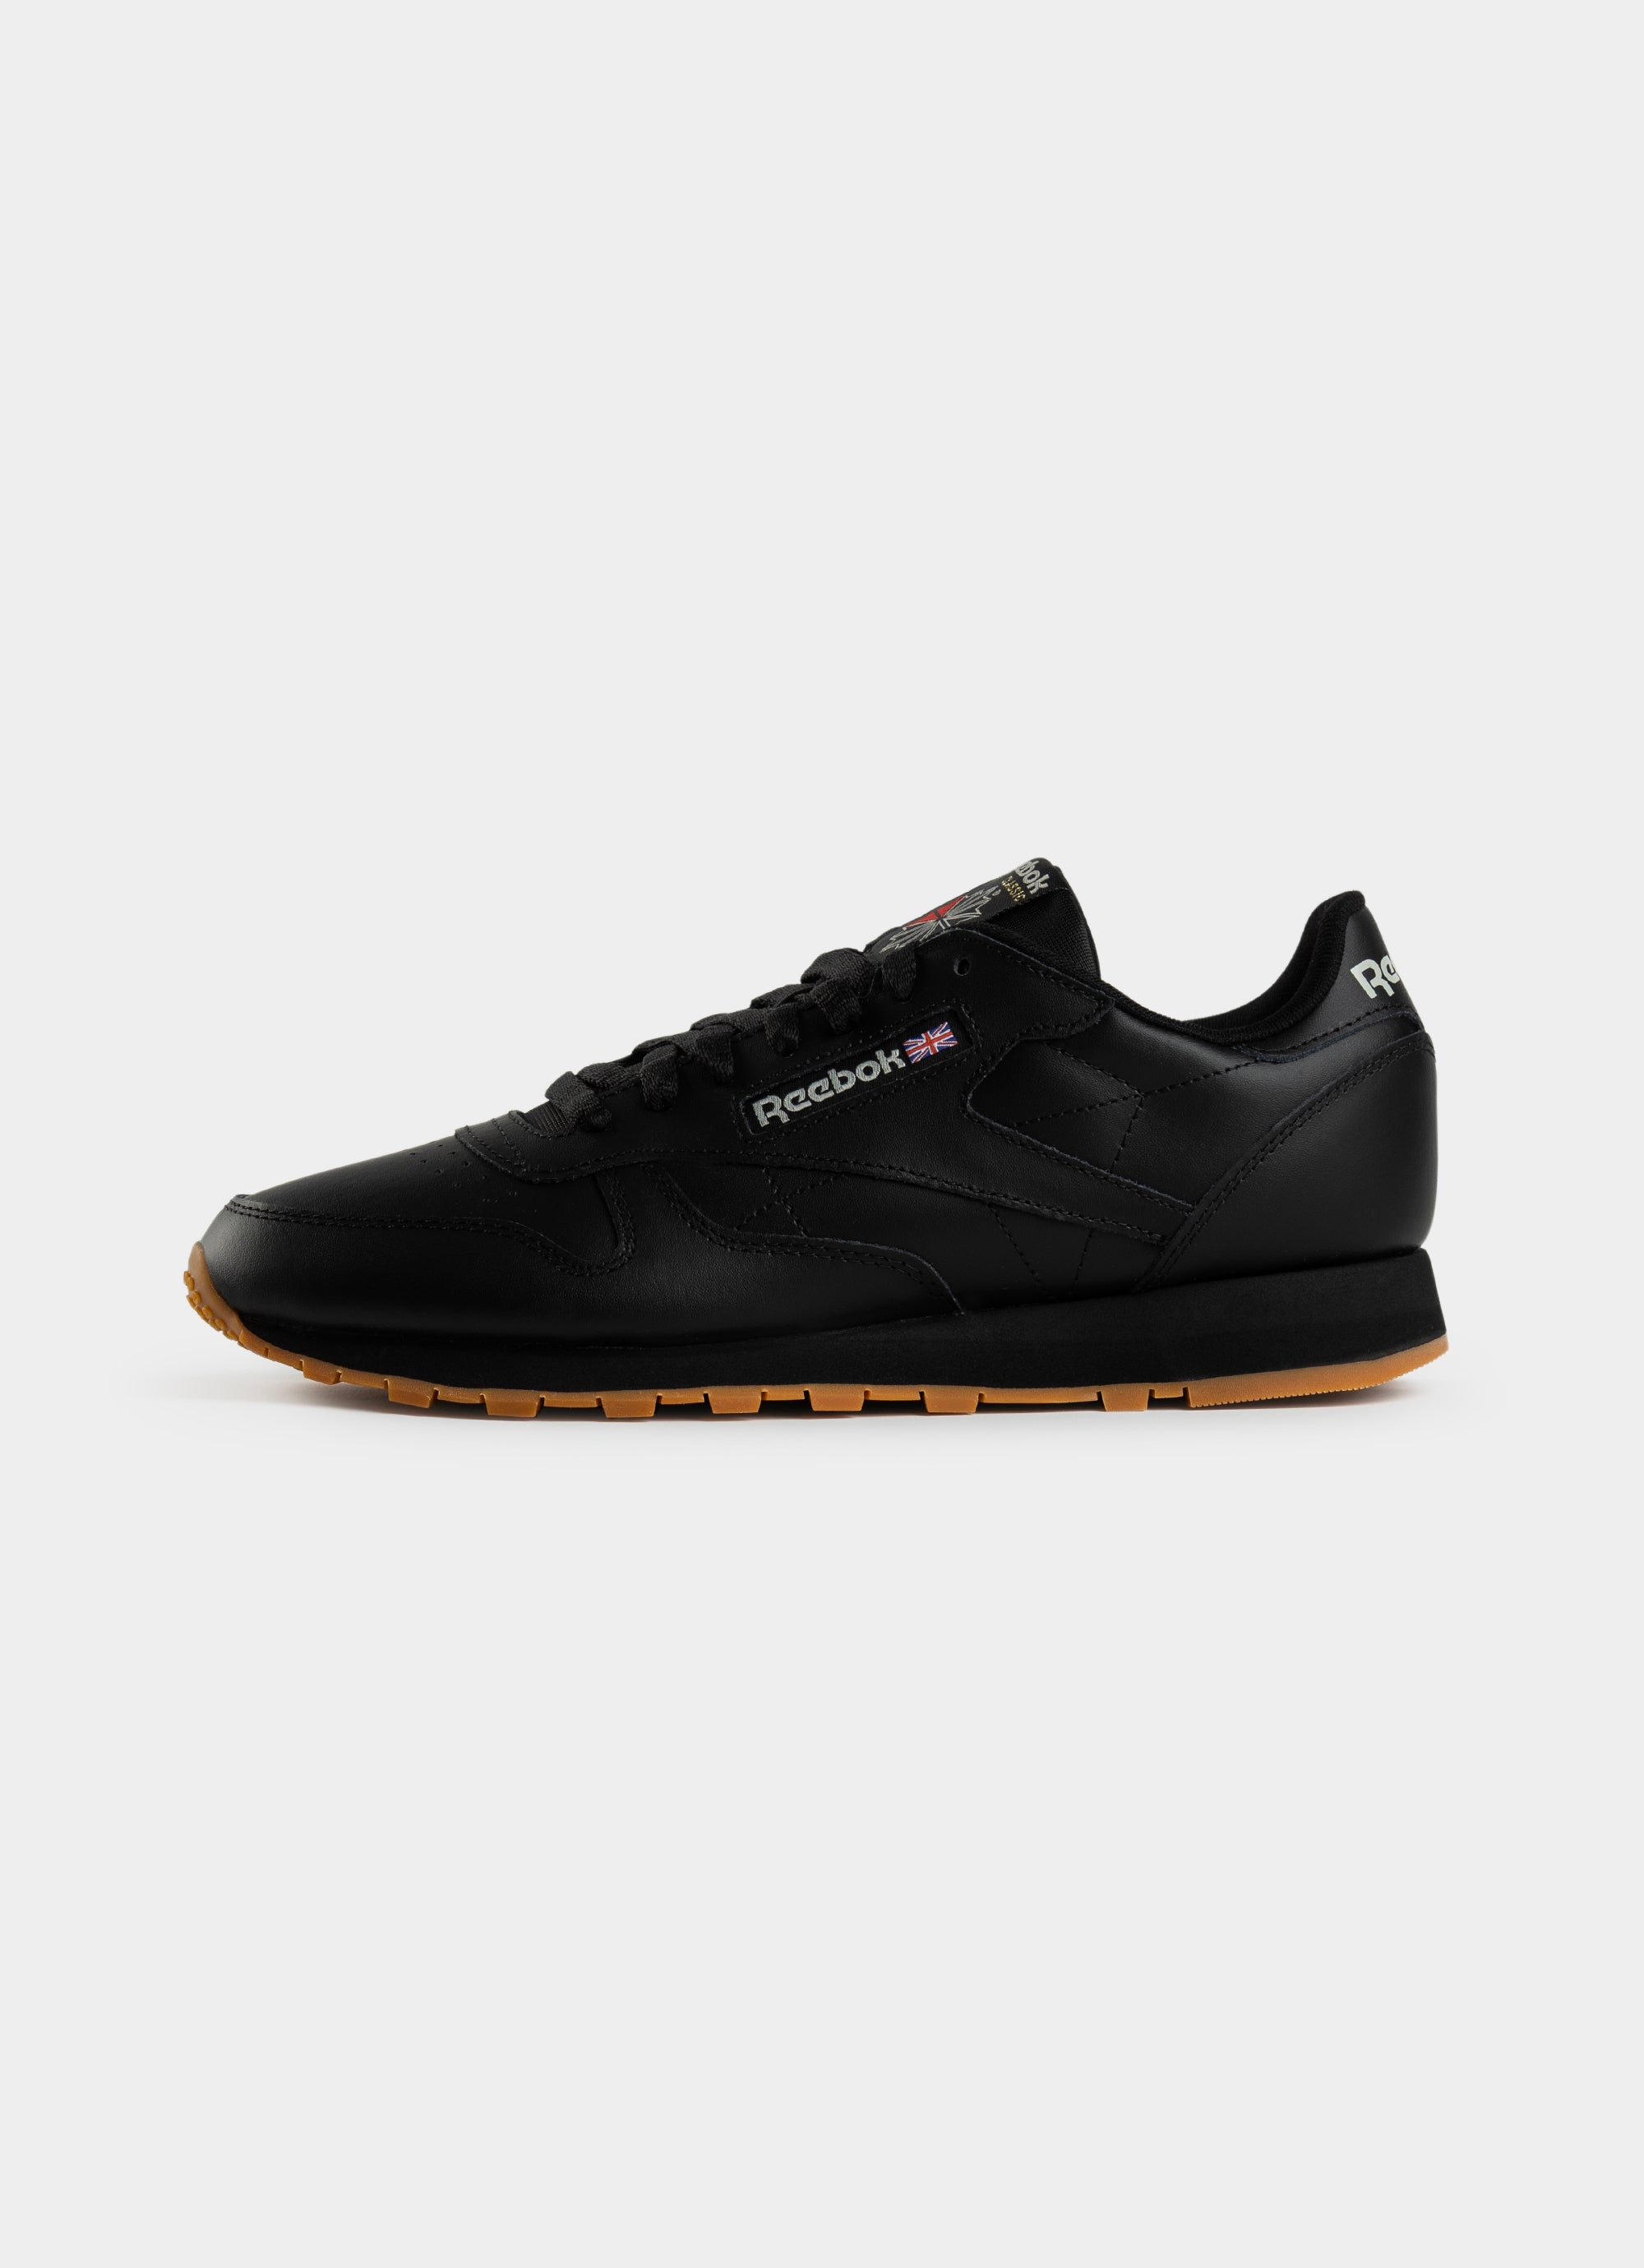 Norm emne siv Reebok Classic Leather Shoes in Black | Red Rat